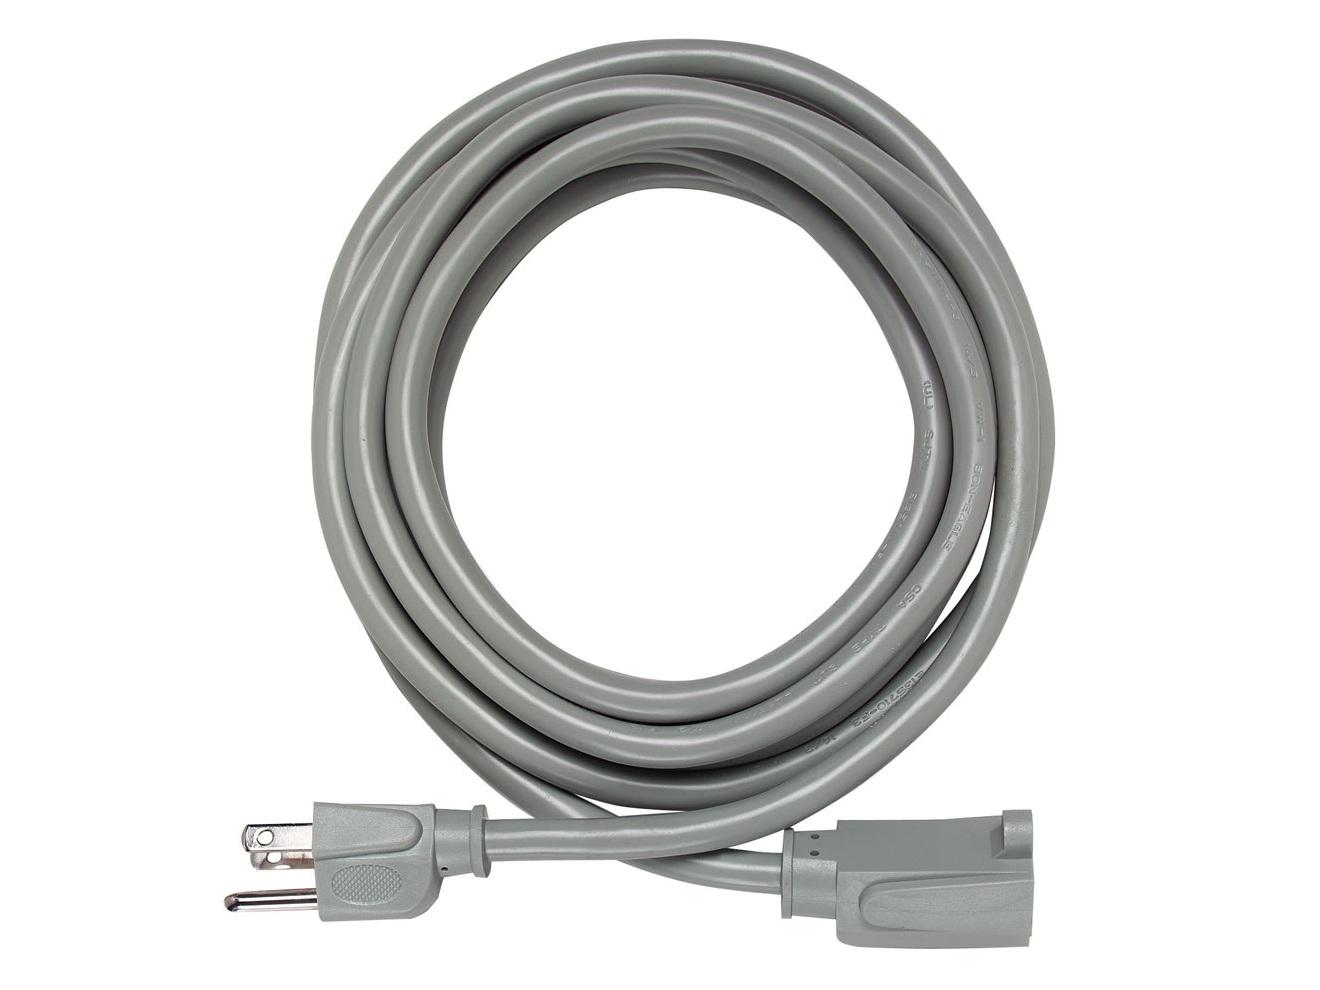 GEC1410 15A 14AWG Extension Cord/10 Ft/Grey by Panamax